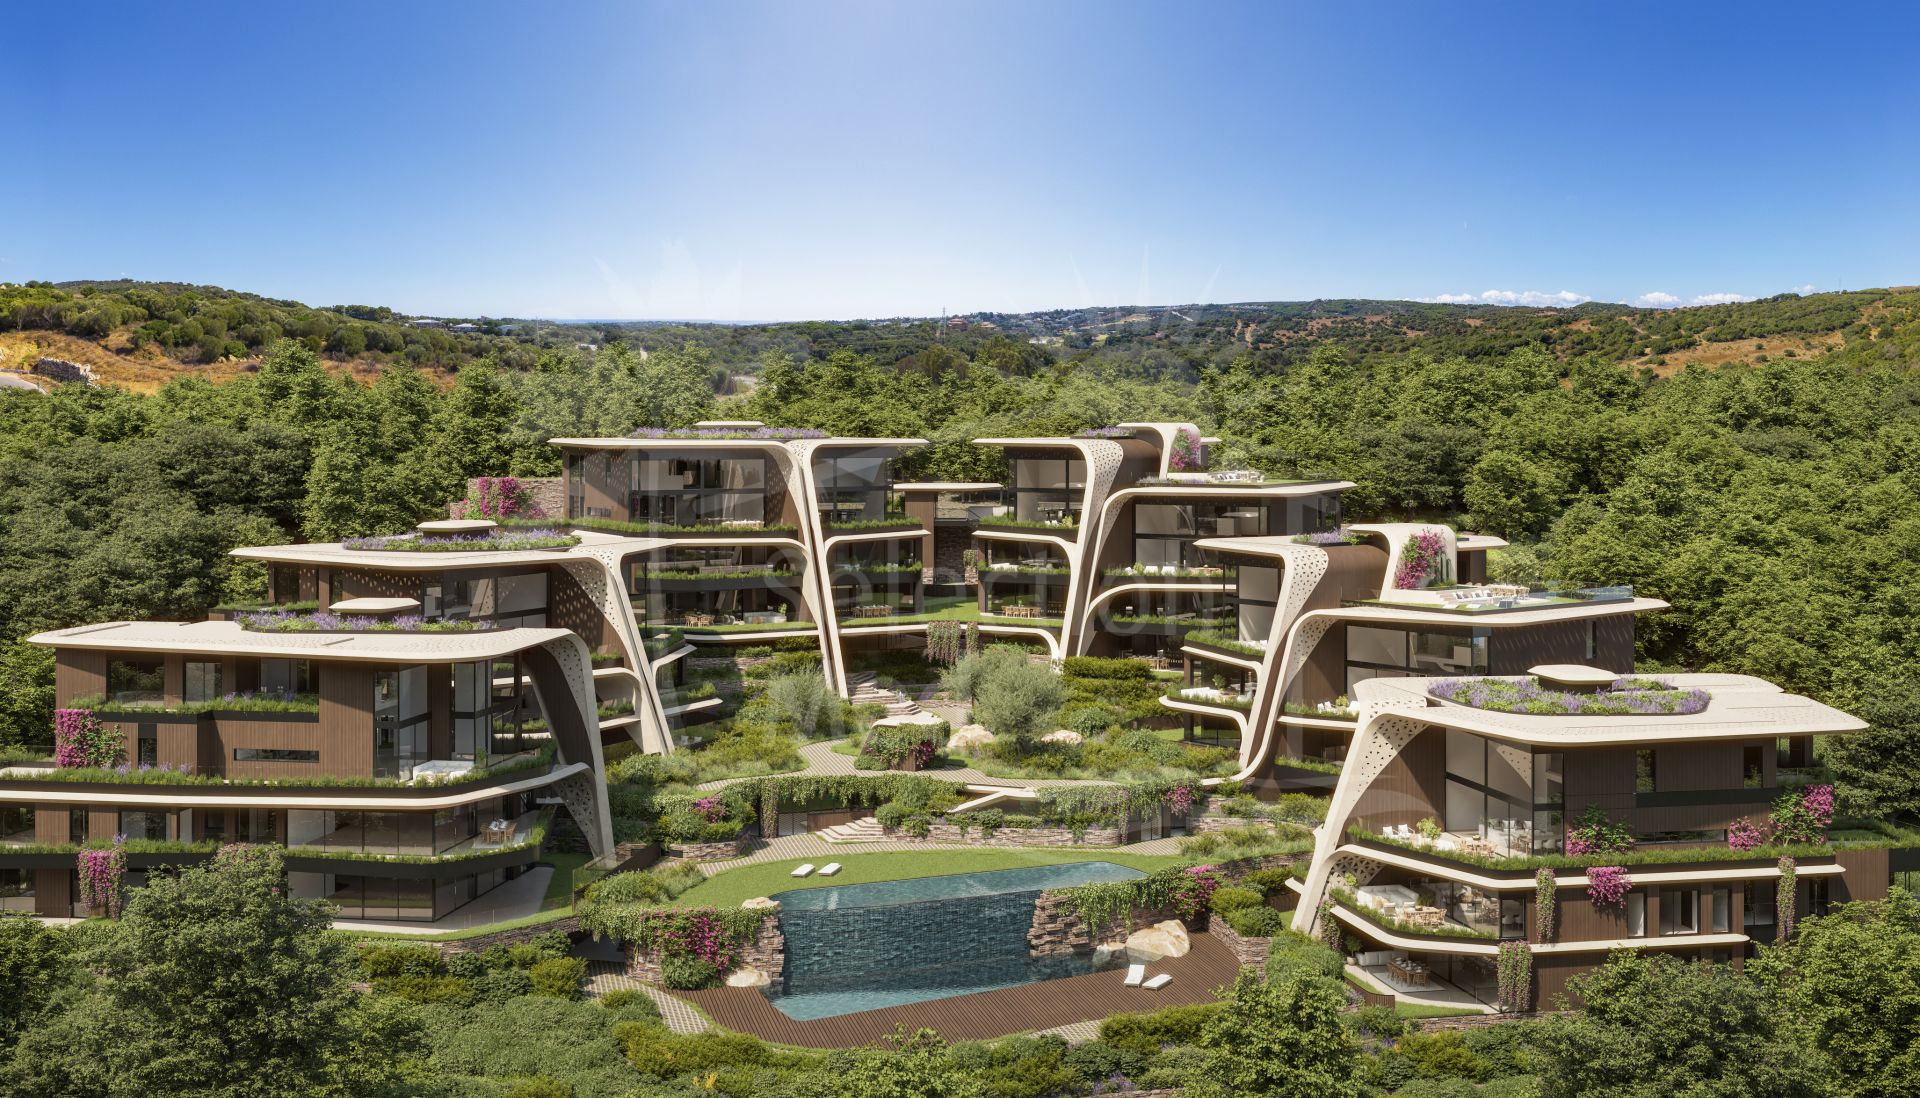 LUXURIOUS 2 BEDROOM CONTEMPORARY PENTHOUSE APARTMENT WITHIN SUSTAINABLE DEVELOPMENT SOTOGRANDE